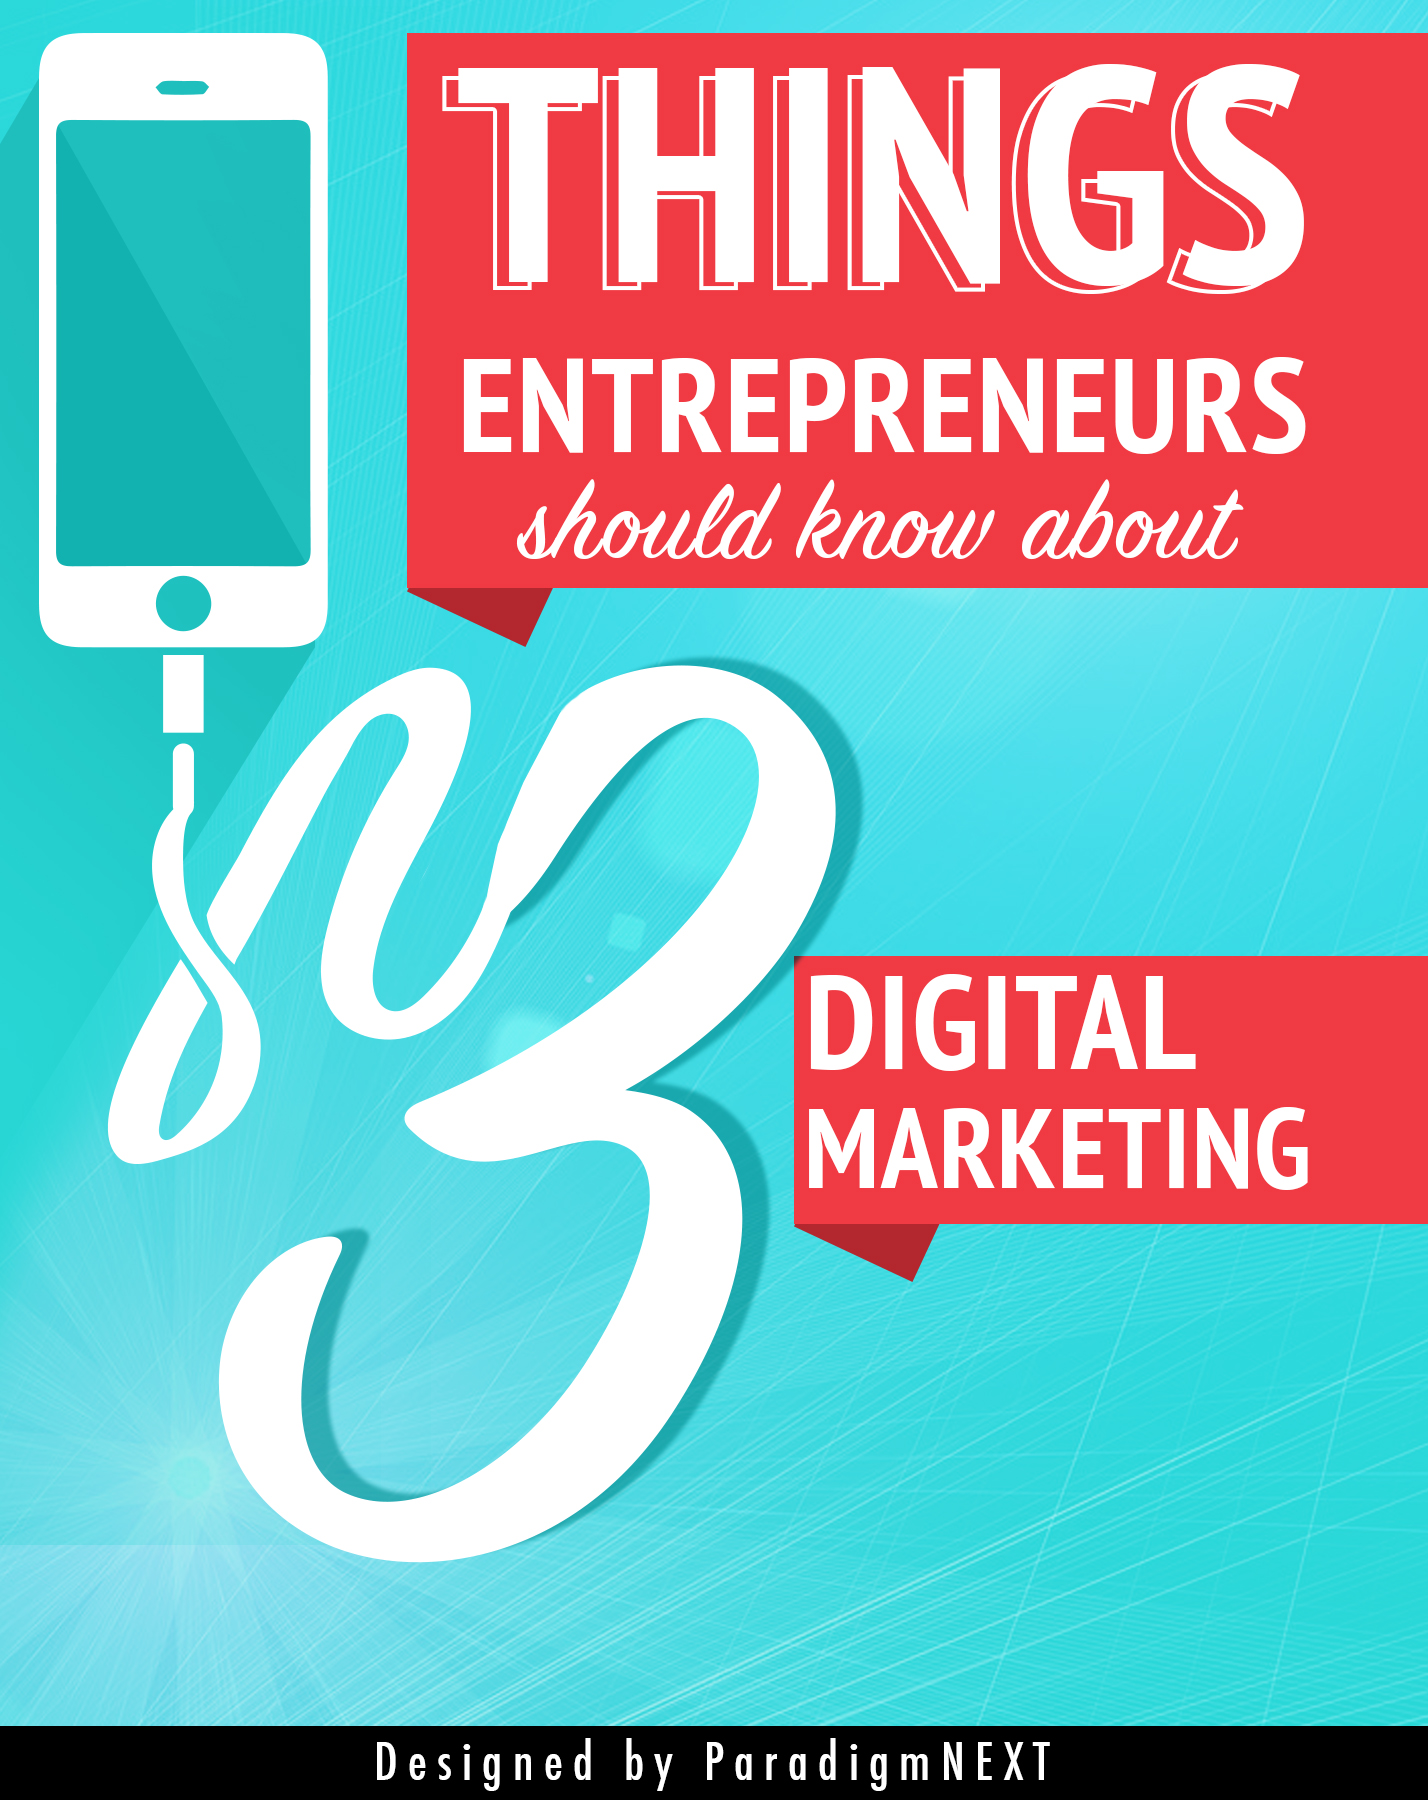 ParadigmNEXT: 3 Things Entrepreneurs should know about Digital Marketing